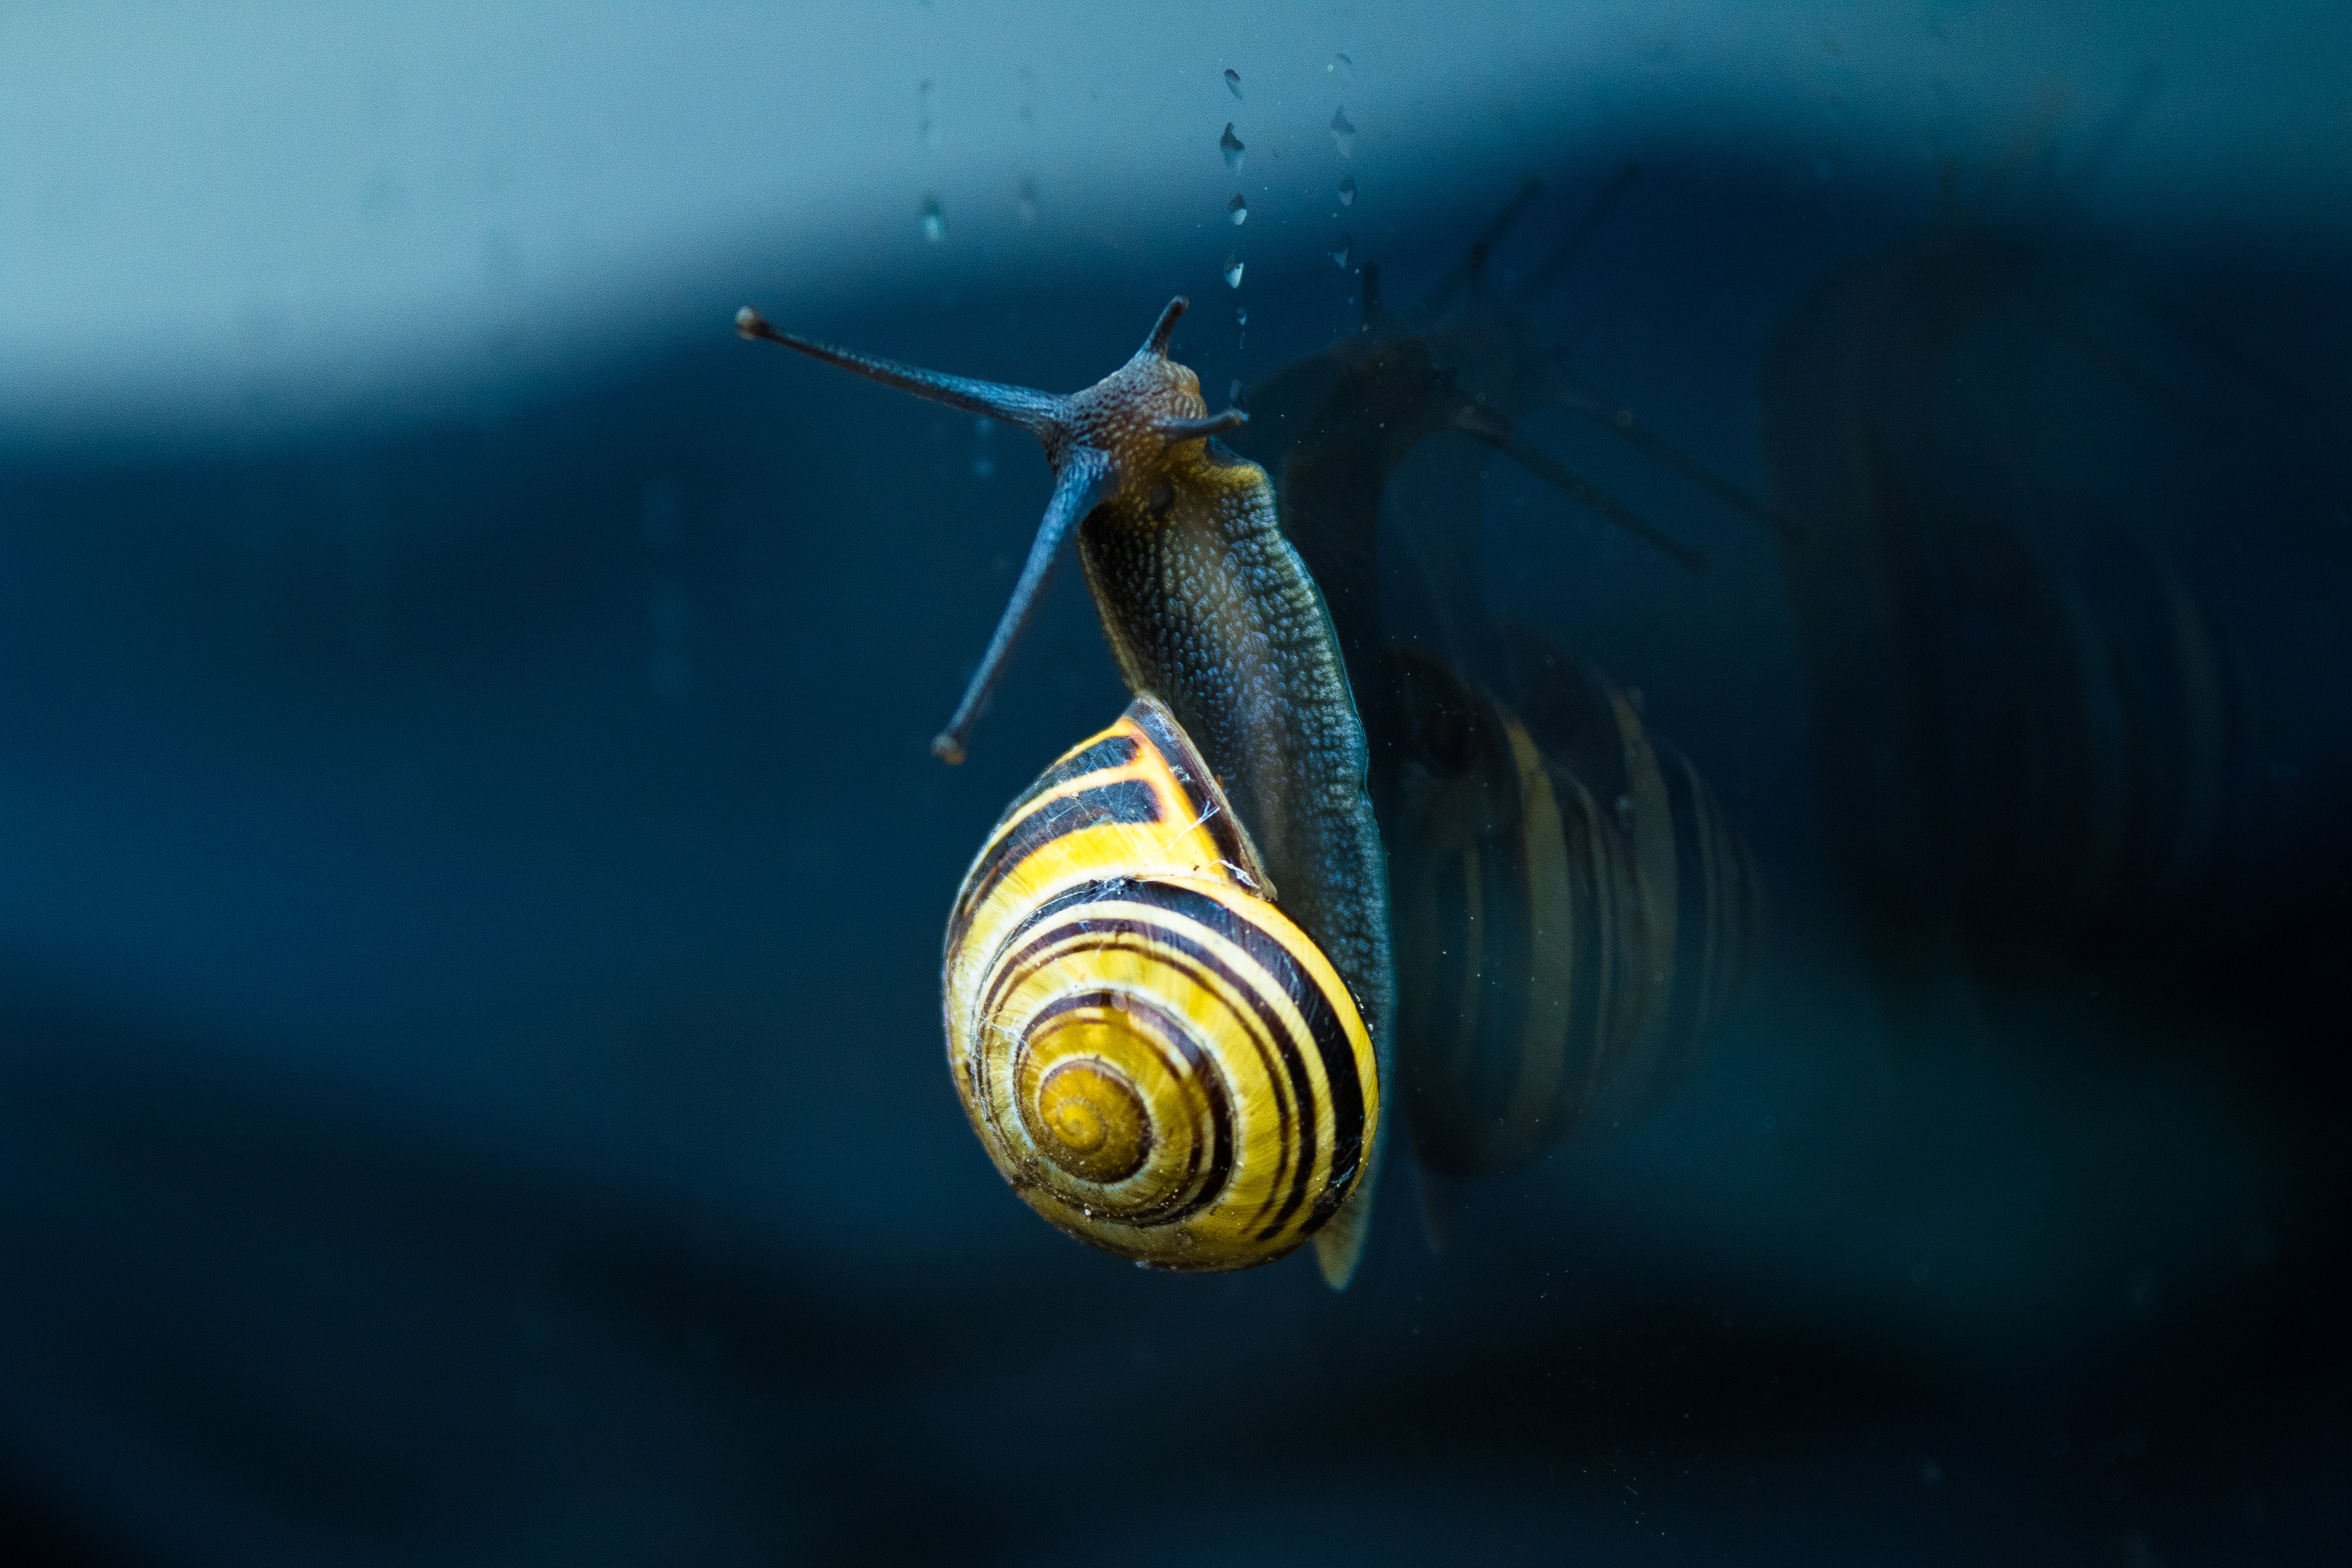 Best Snail wallpapers for phone screen